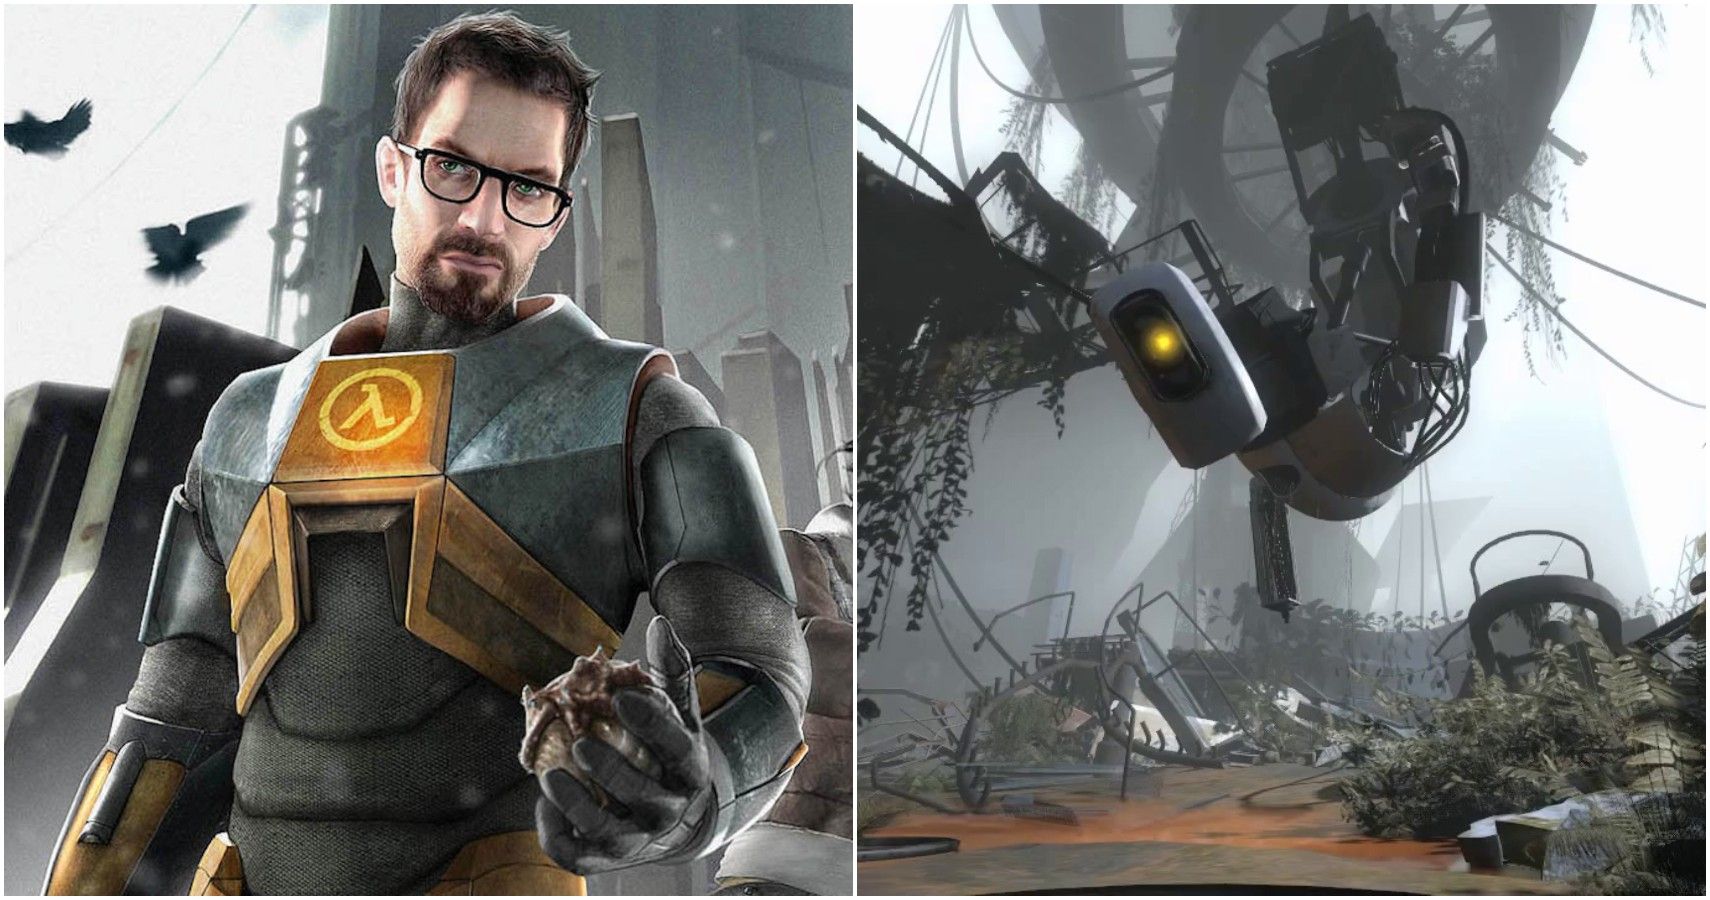 Half-Life instal the new for android